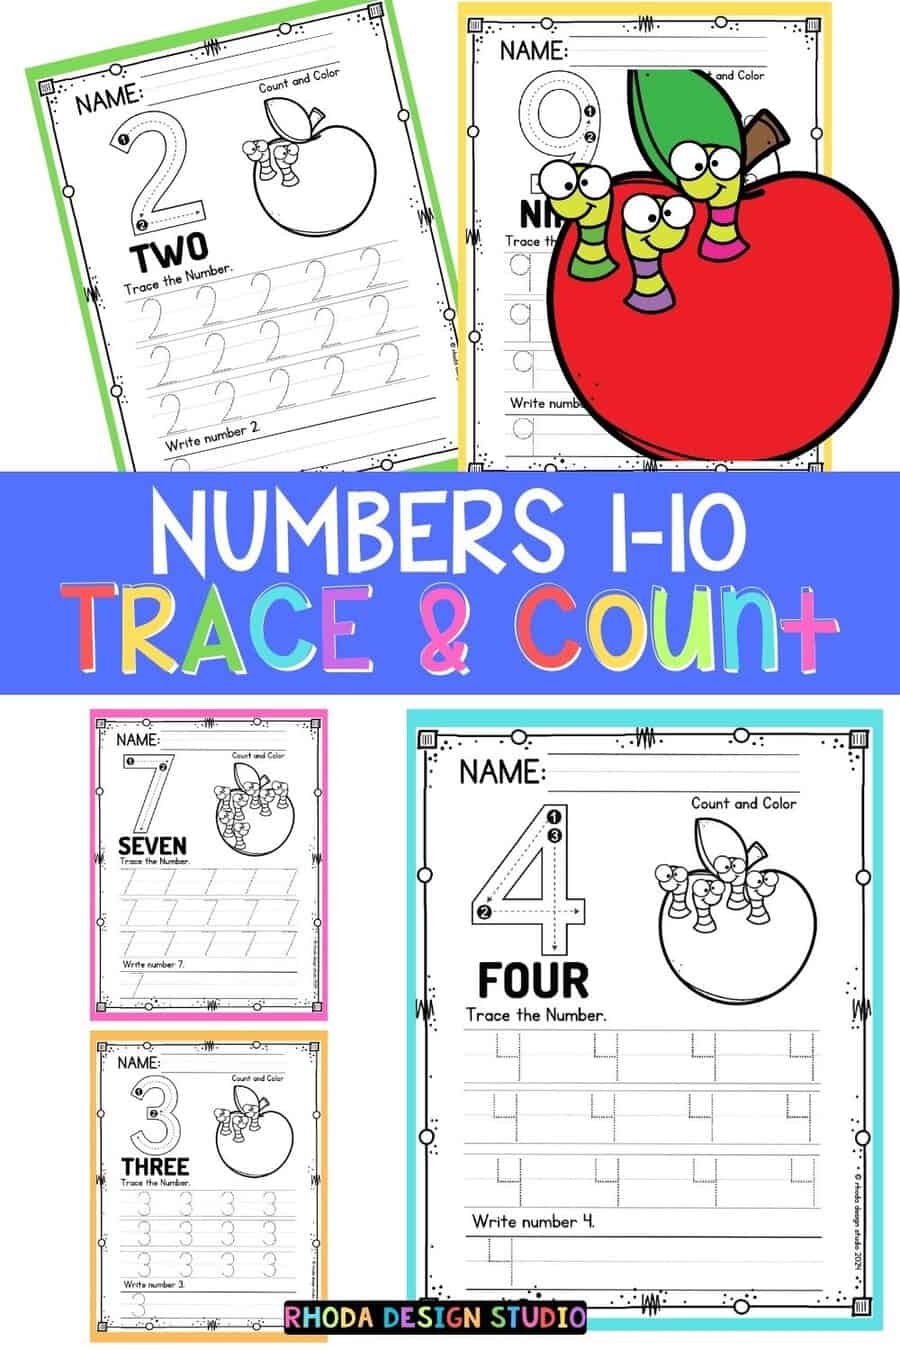 Counting Worms Free Number Tracing Worksheets